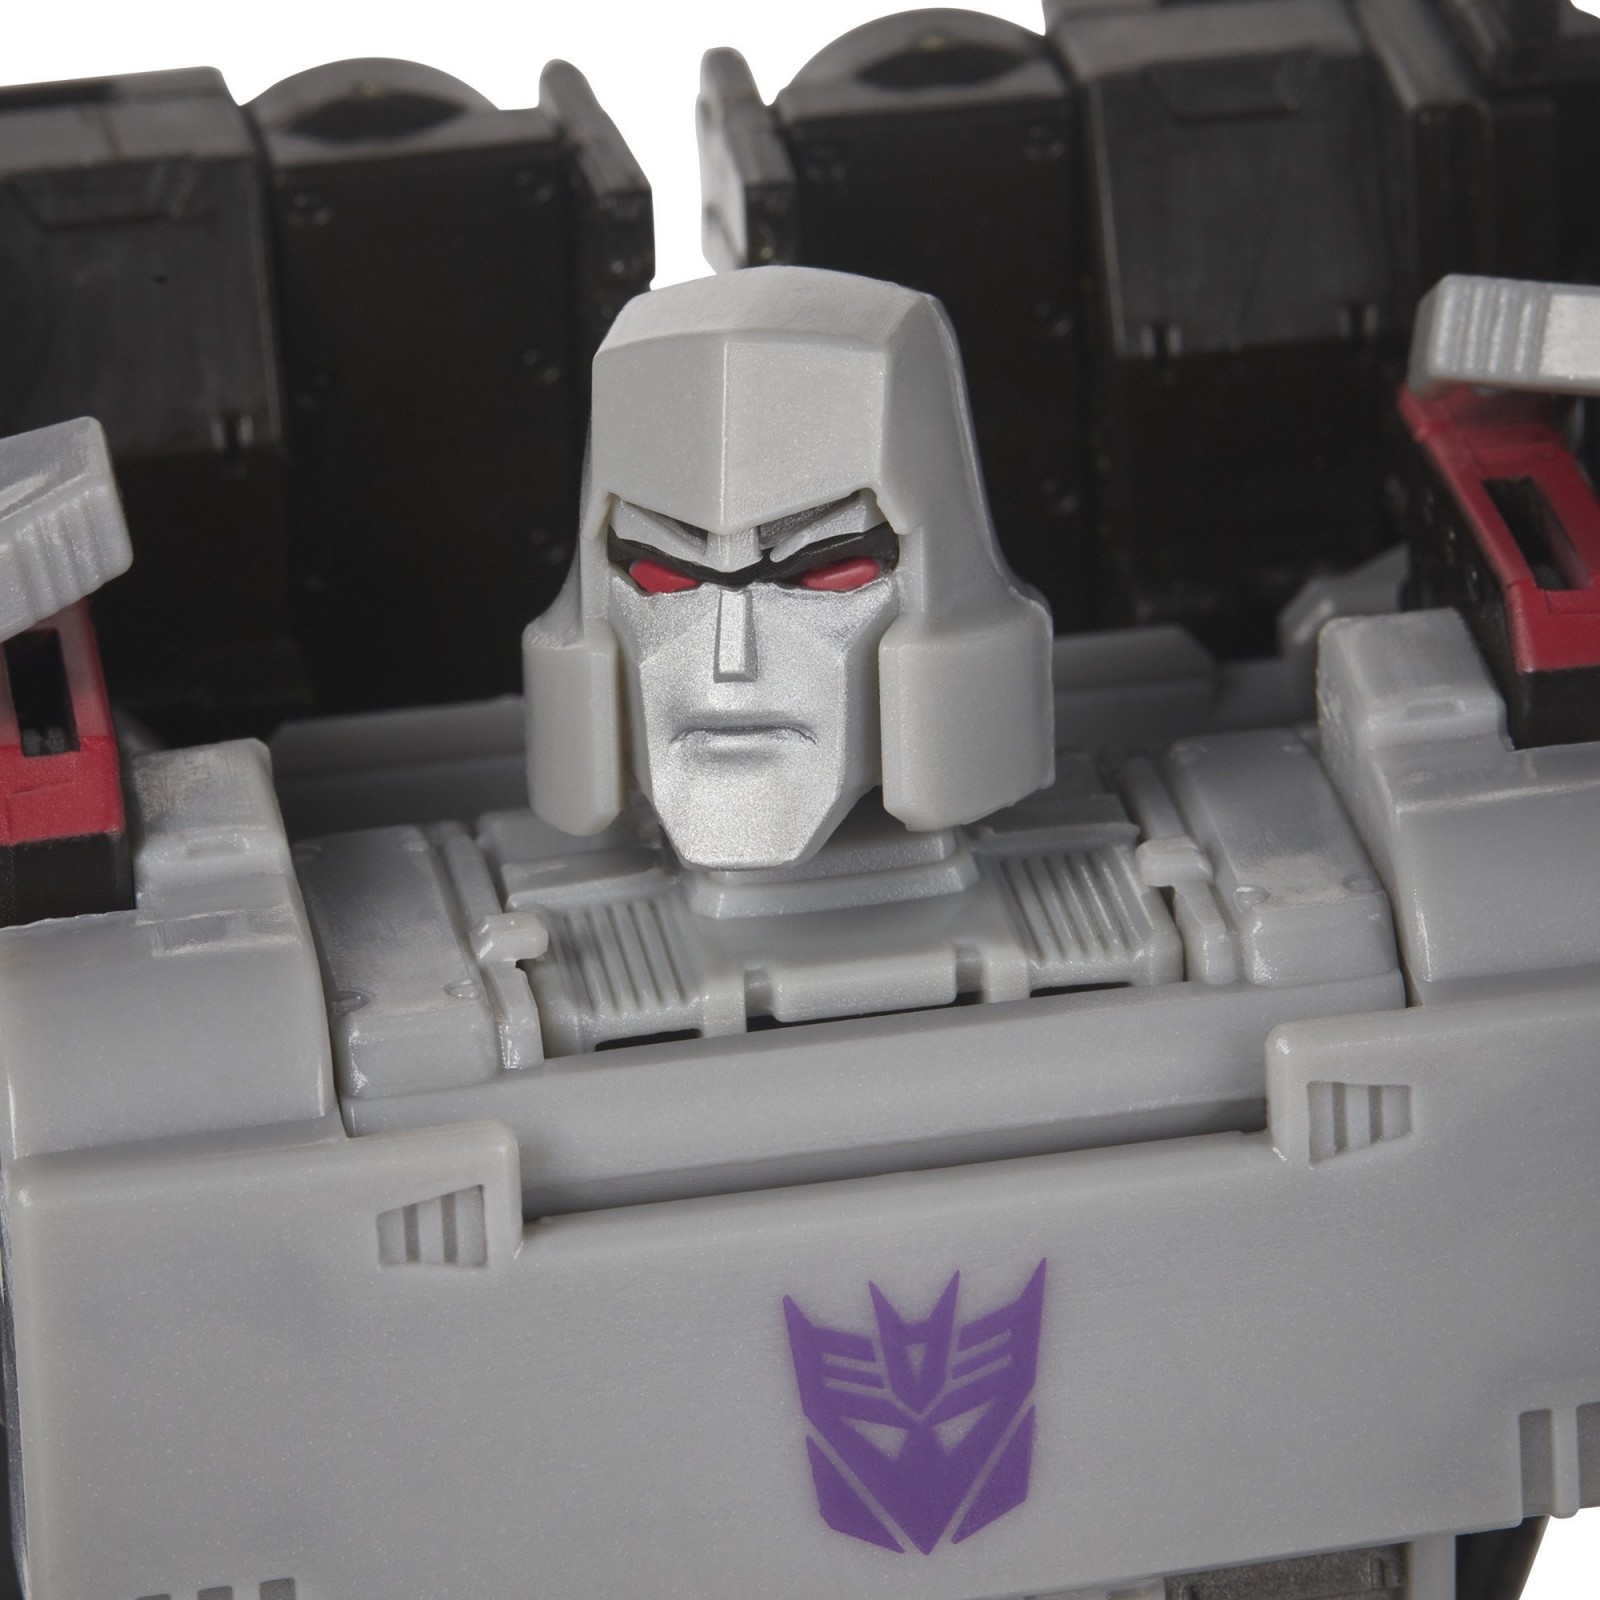 Transformers News: New Images of Transformers Earthrise Sunstreaker and Megatron